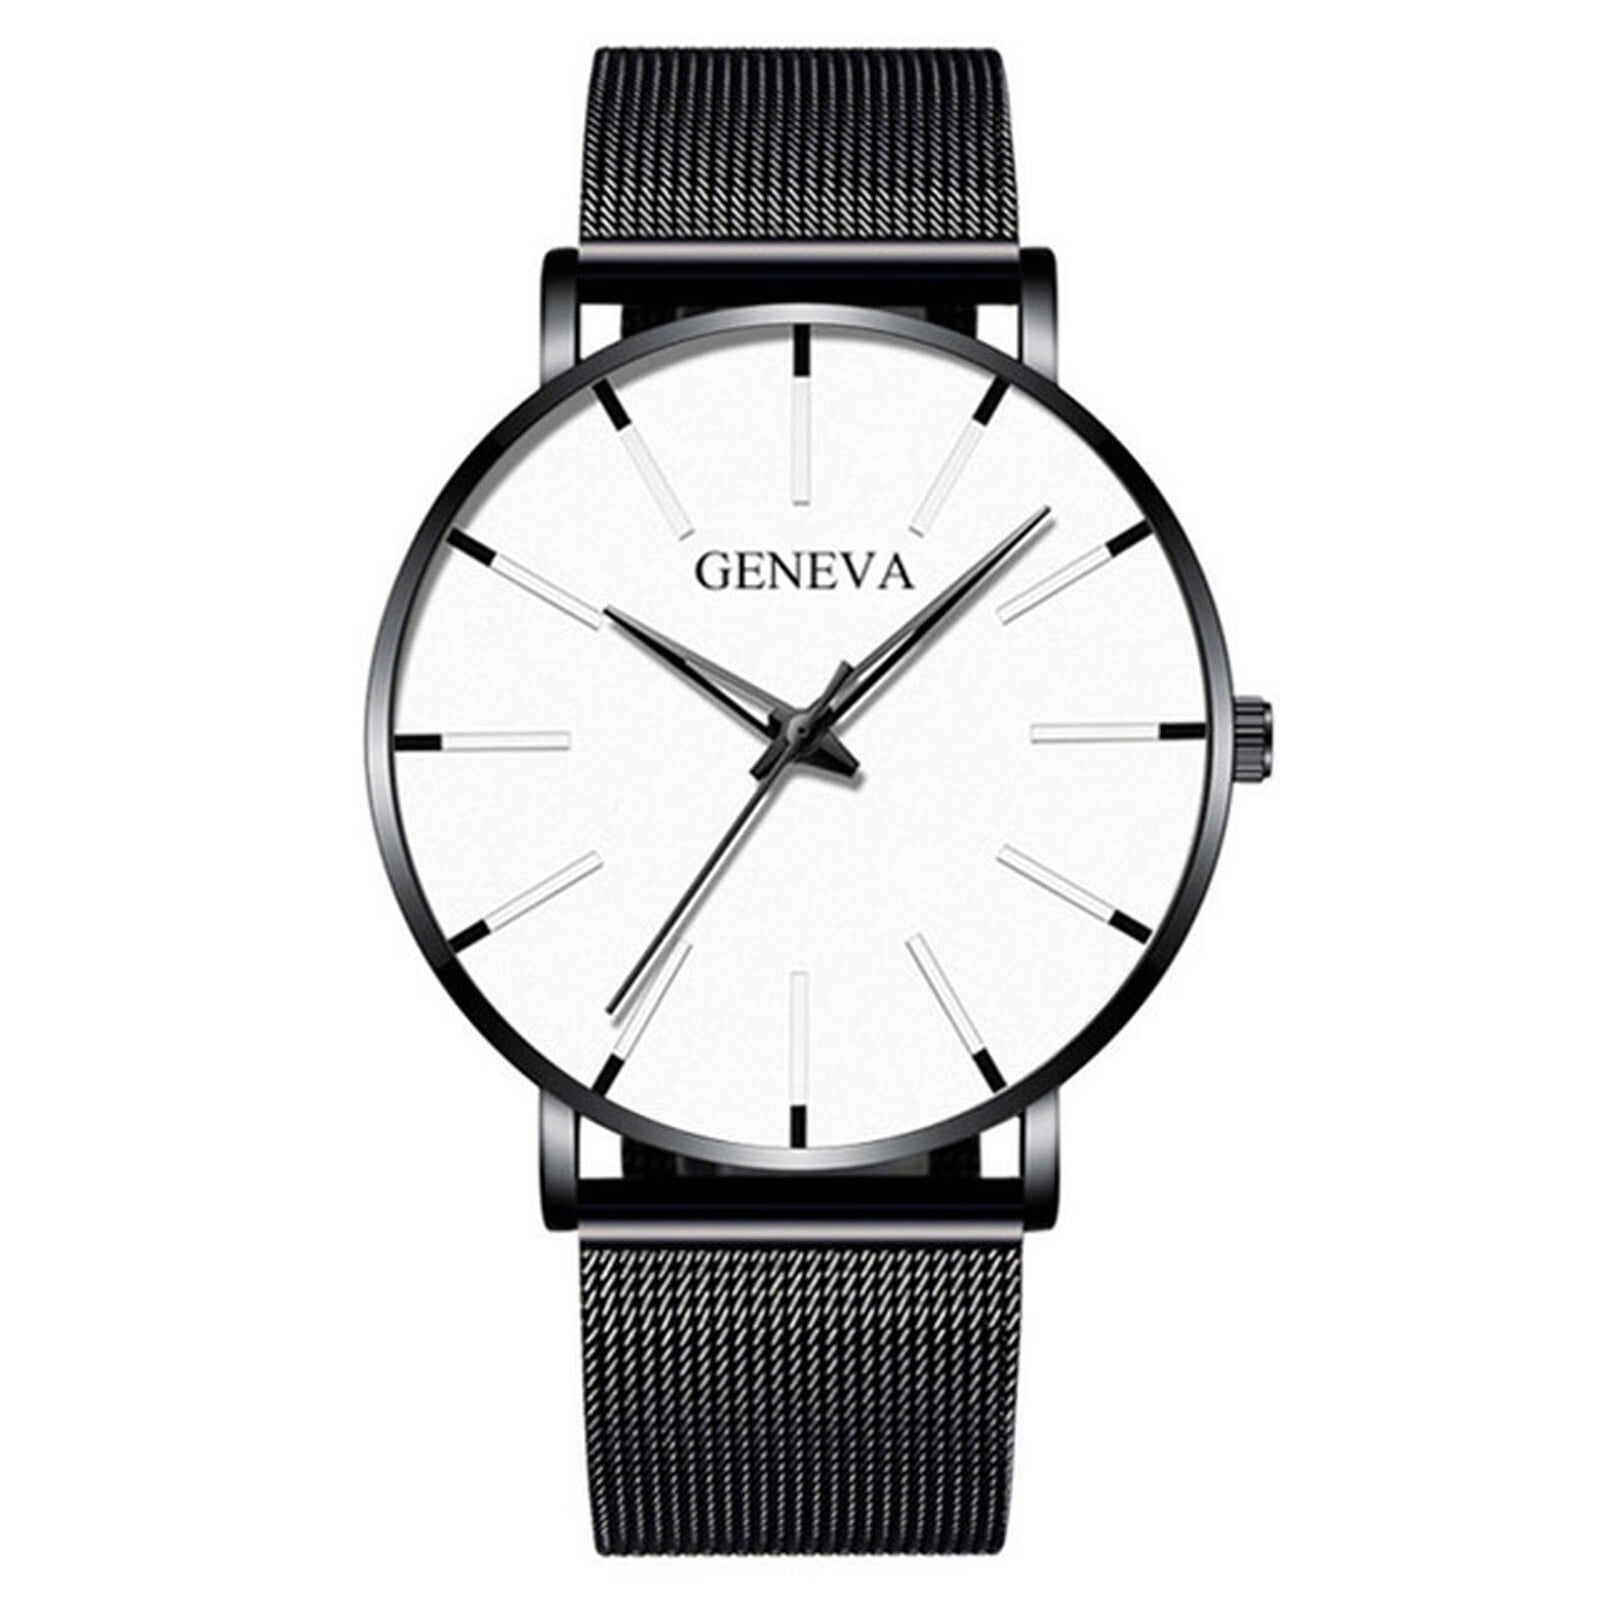 Sehao Men's Watch Men's Ultra Thin Watches Business Stainless Steel ...